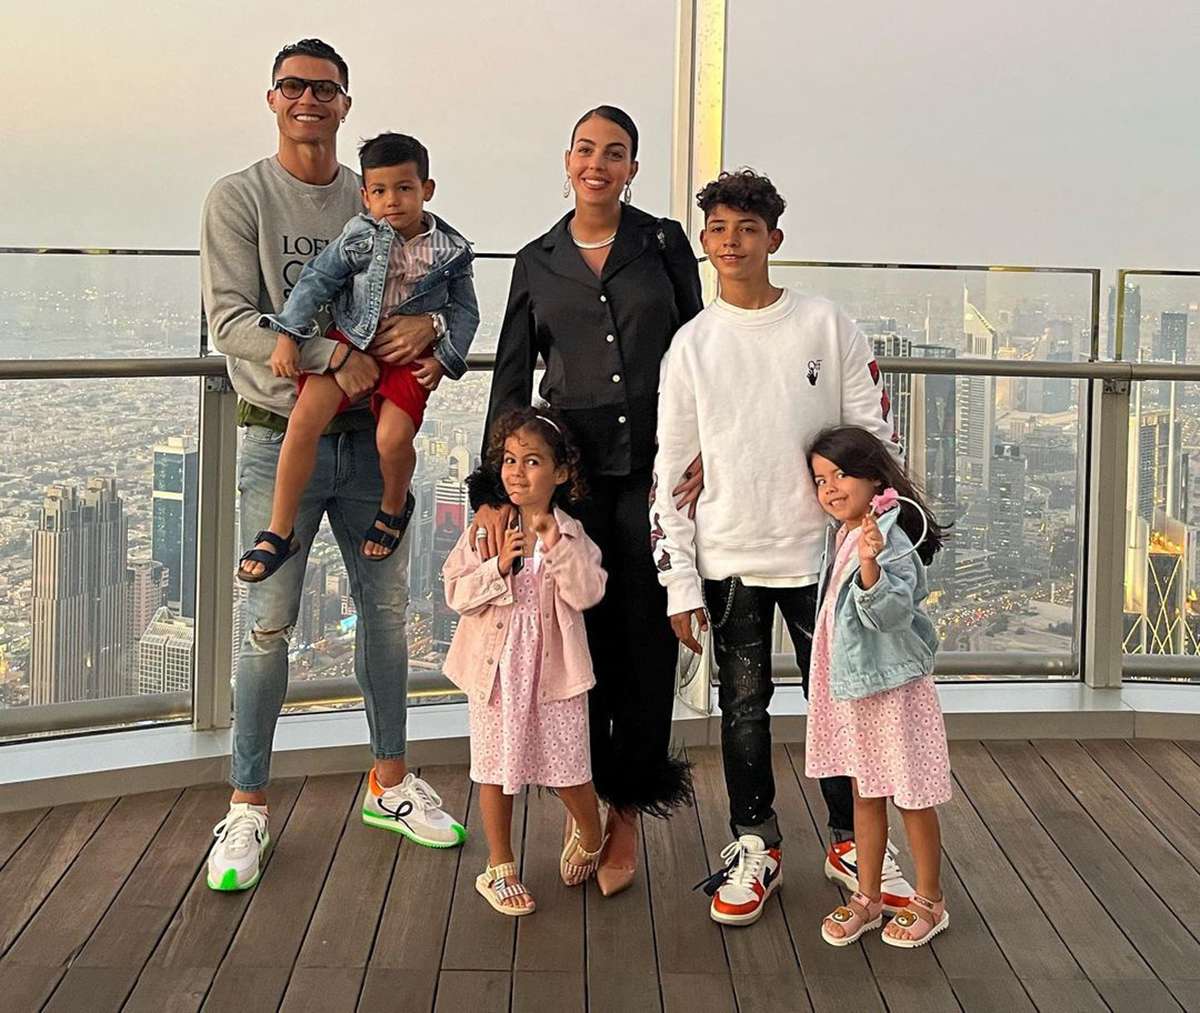 Cristiano Ronaldo Poses with His 4 Kids at the Beach in Dubai | PEOPLE.com